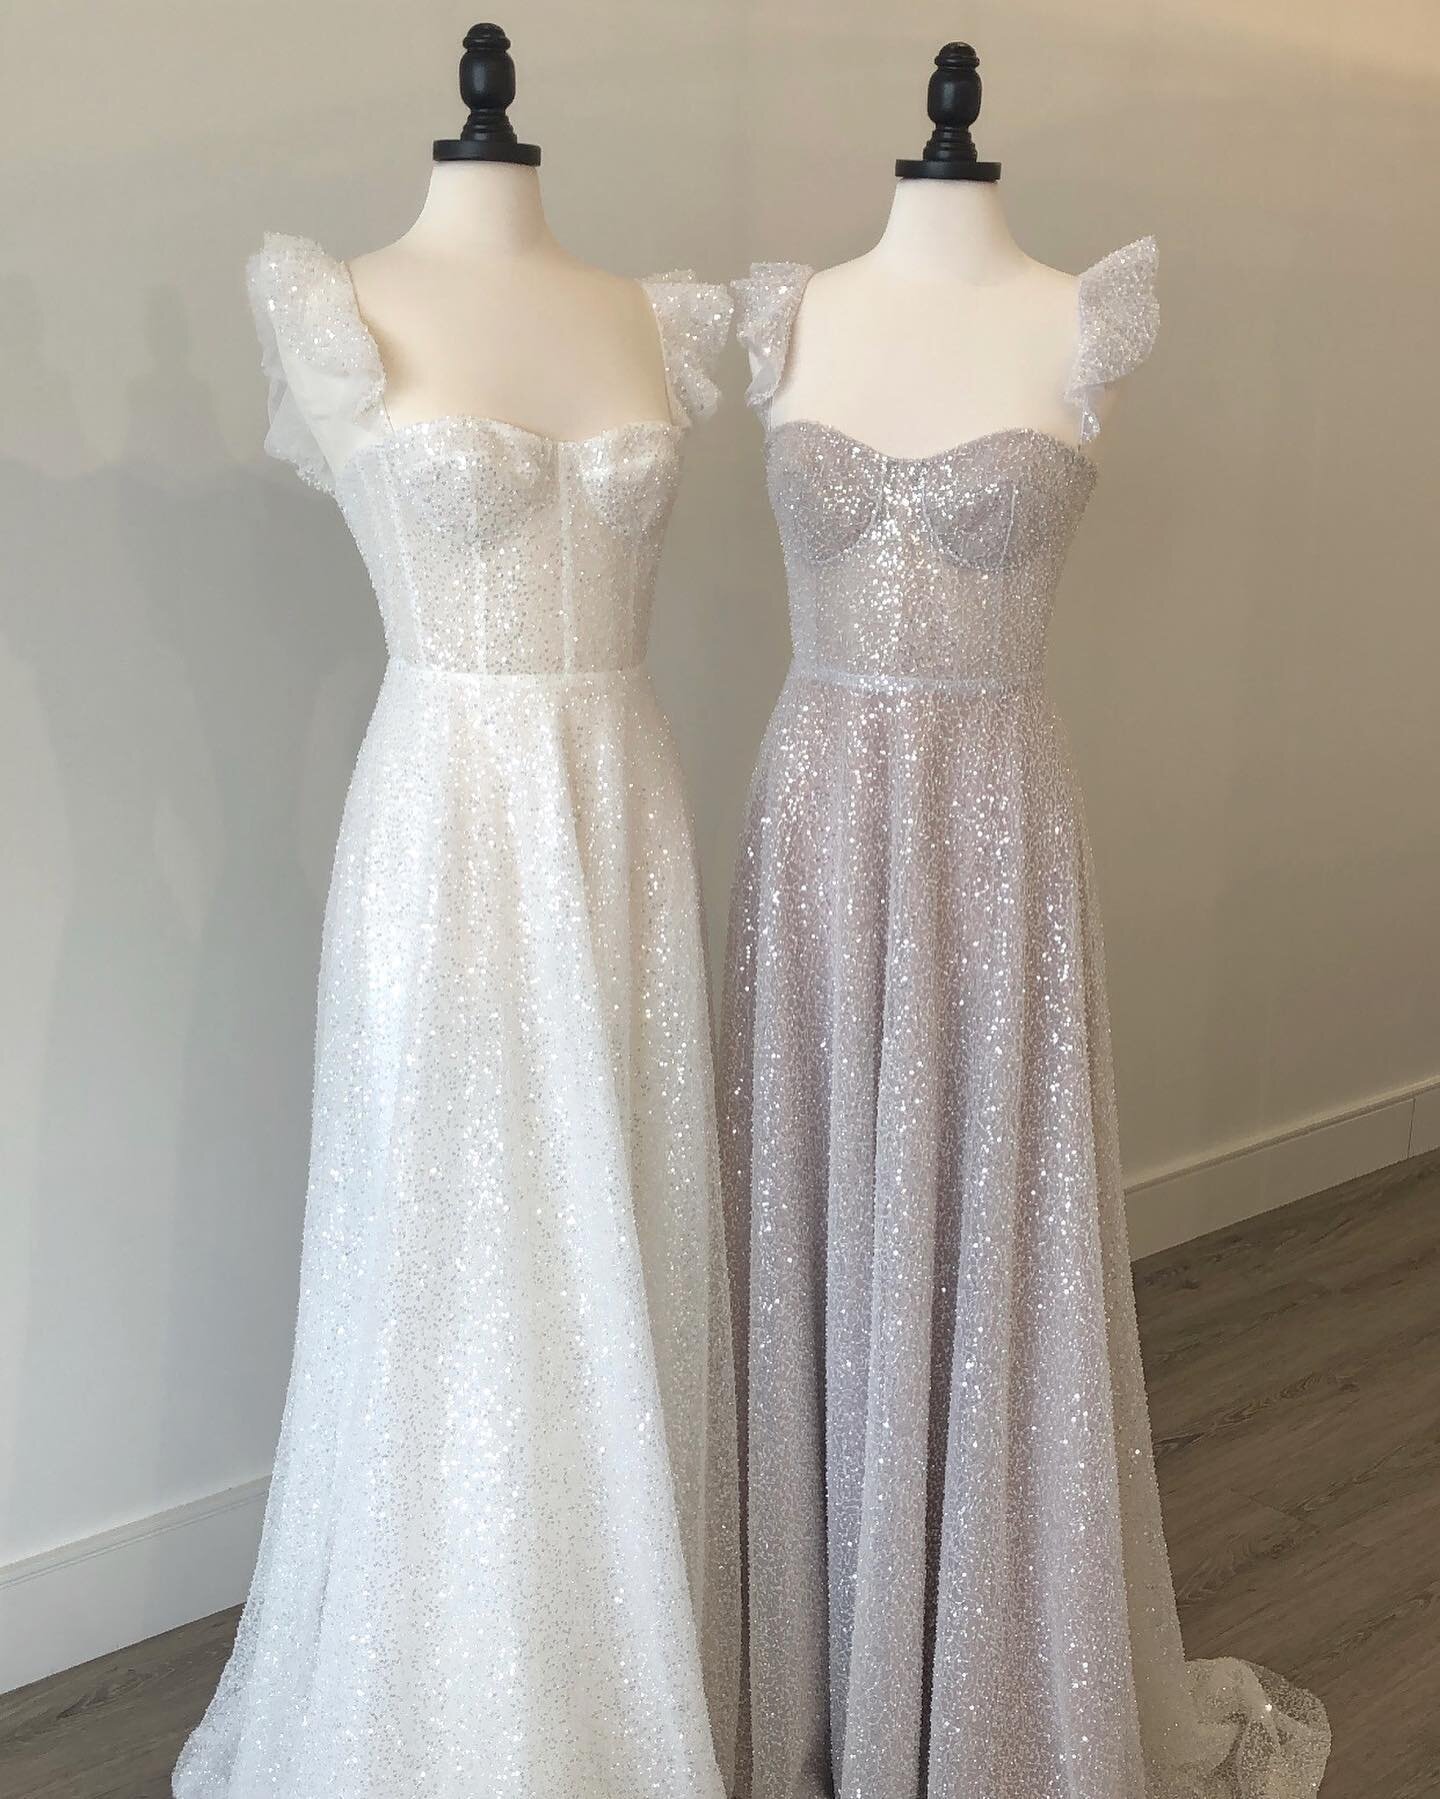 sister, sister! MYRTUS by @alenaleenabridal is just as radiant in white as the original smoky blush color ✨ and the best part? Myrtus can be worn with the ruffle straps up, off-the-shoulder, strapless OR opt for a flat spaghetti strap. We call it a 4